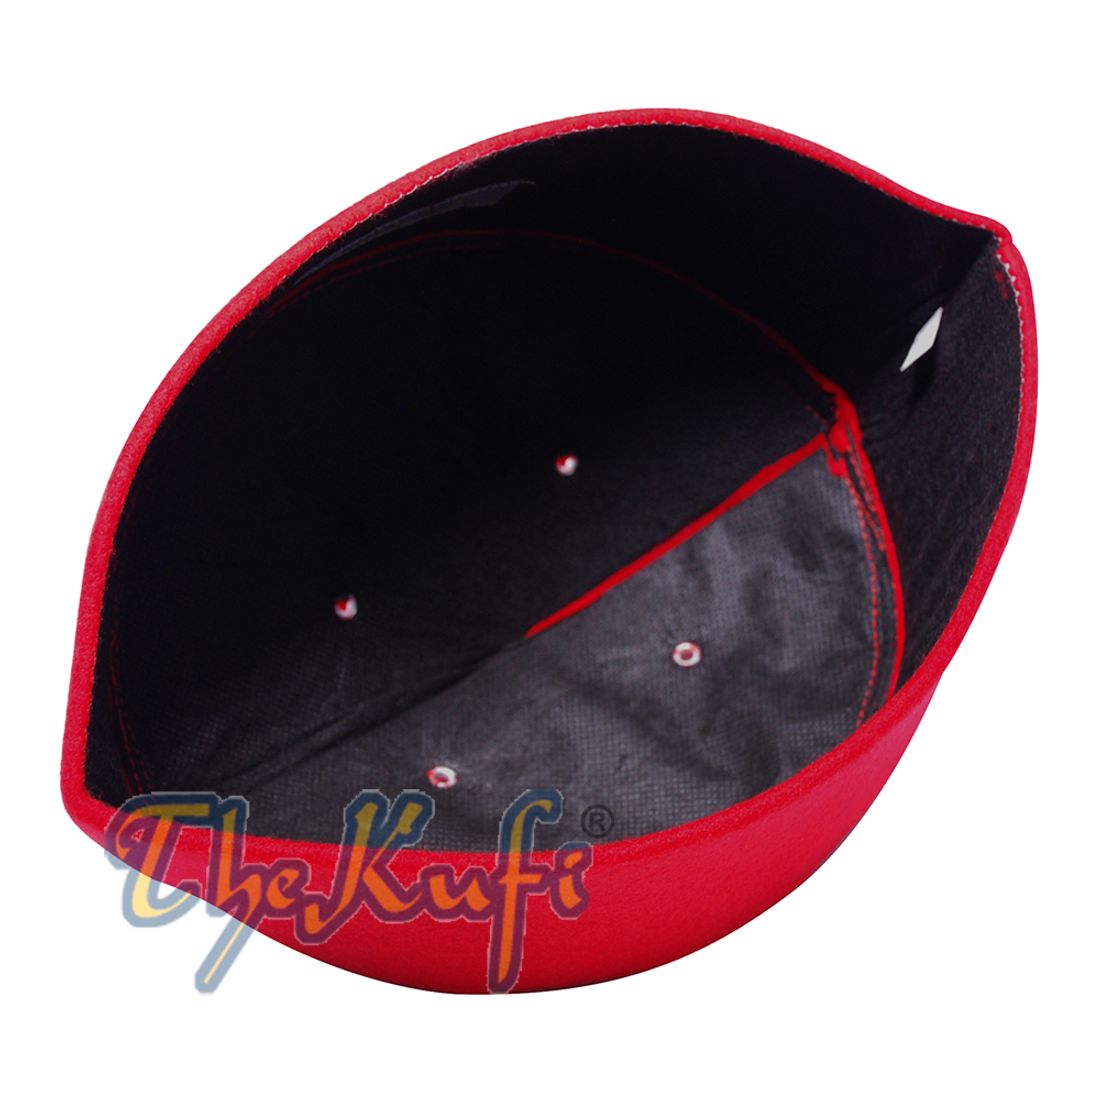 Red Handmade Vented Pointed-top Faux Felt Fez